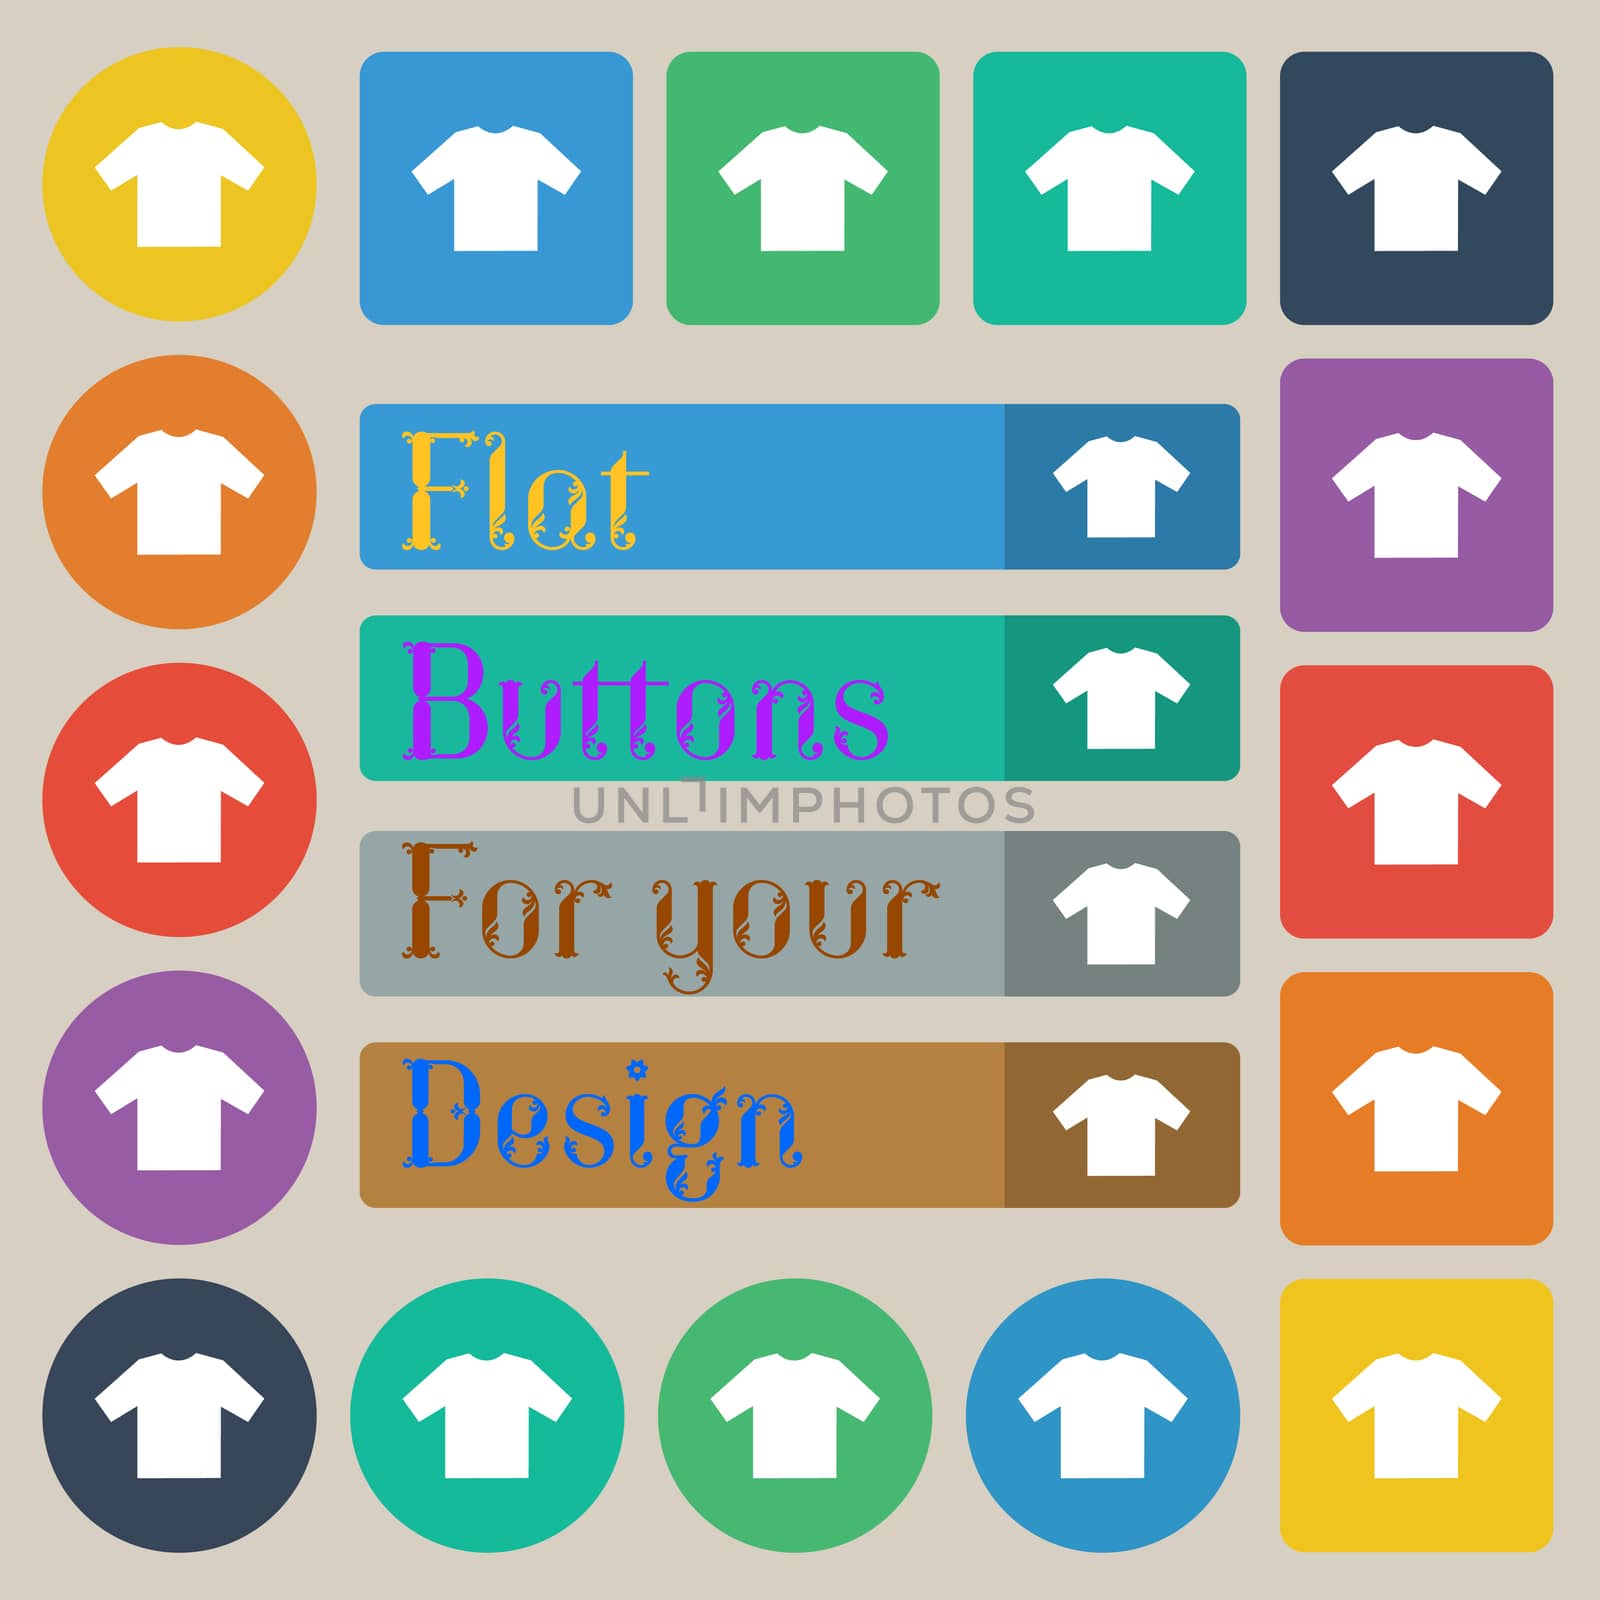 t-shirt icon sign. Set of twenty colored flat, round, square and rectangular buttons. illustration